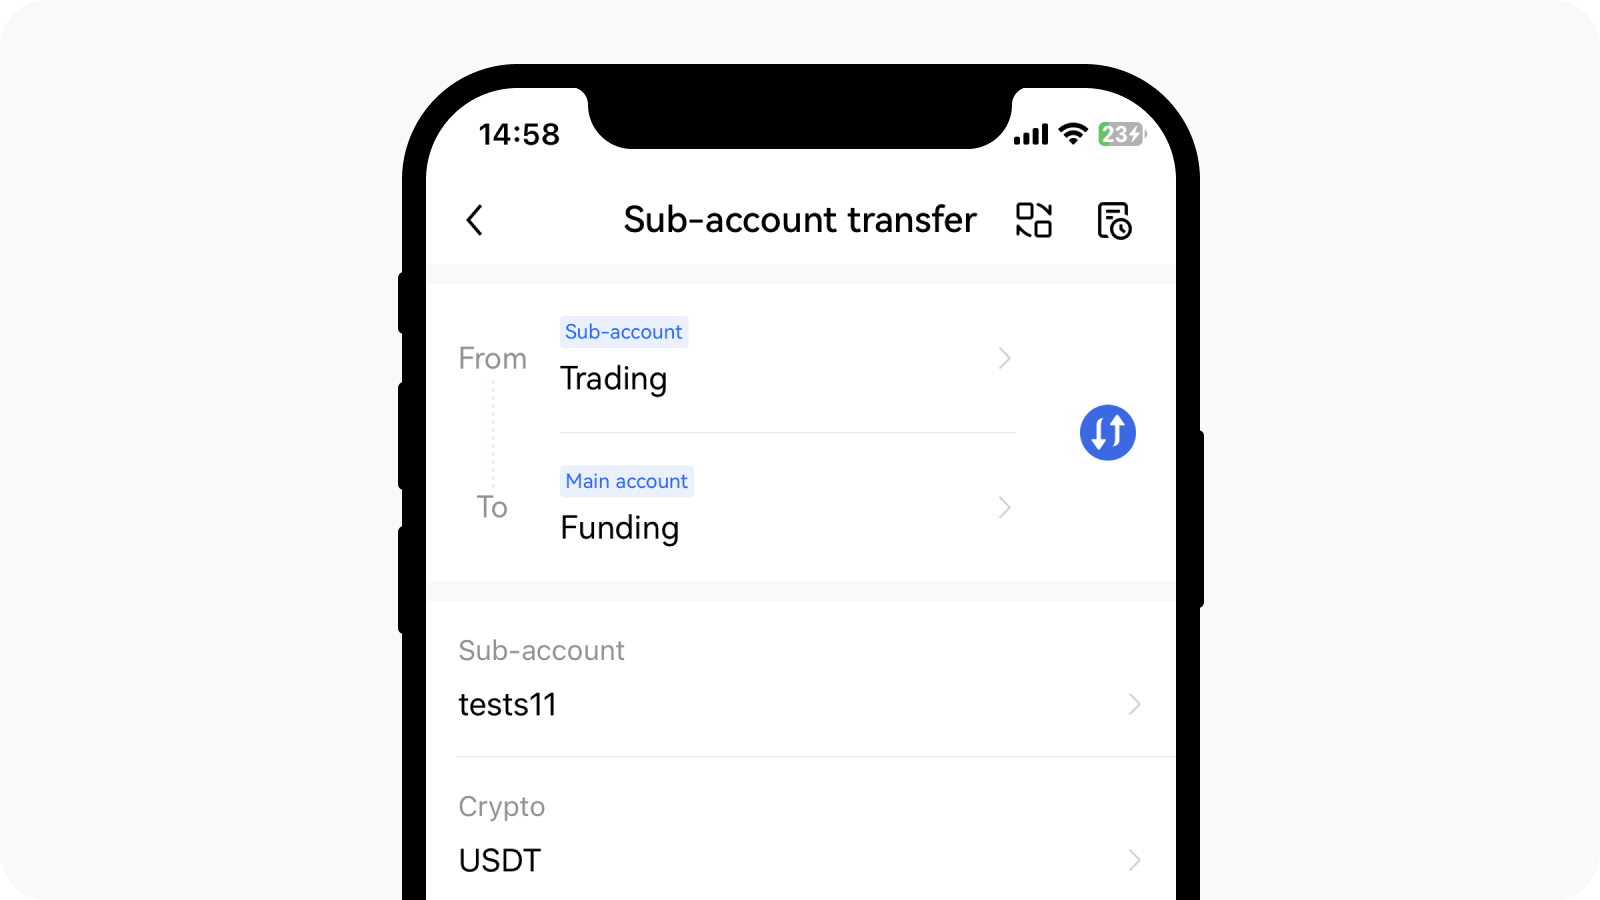 Select sub-account transfer at the top right corner